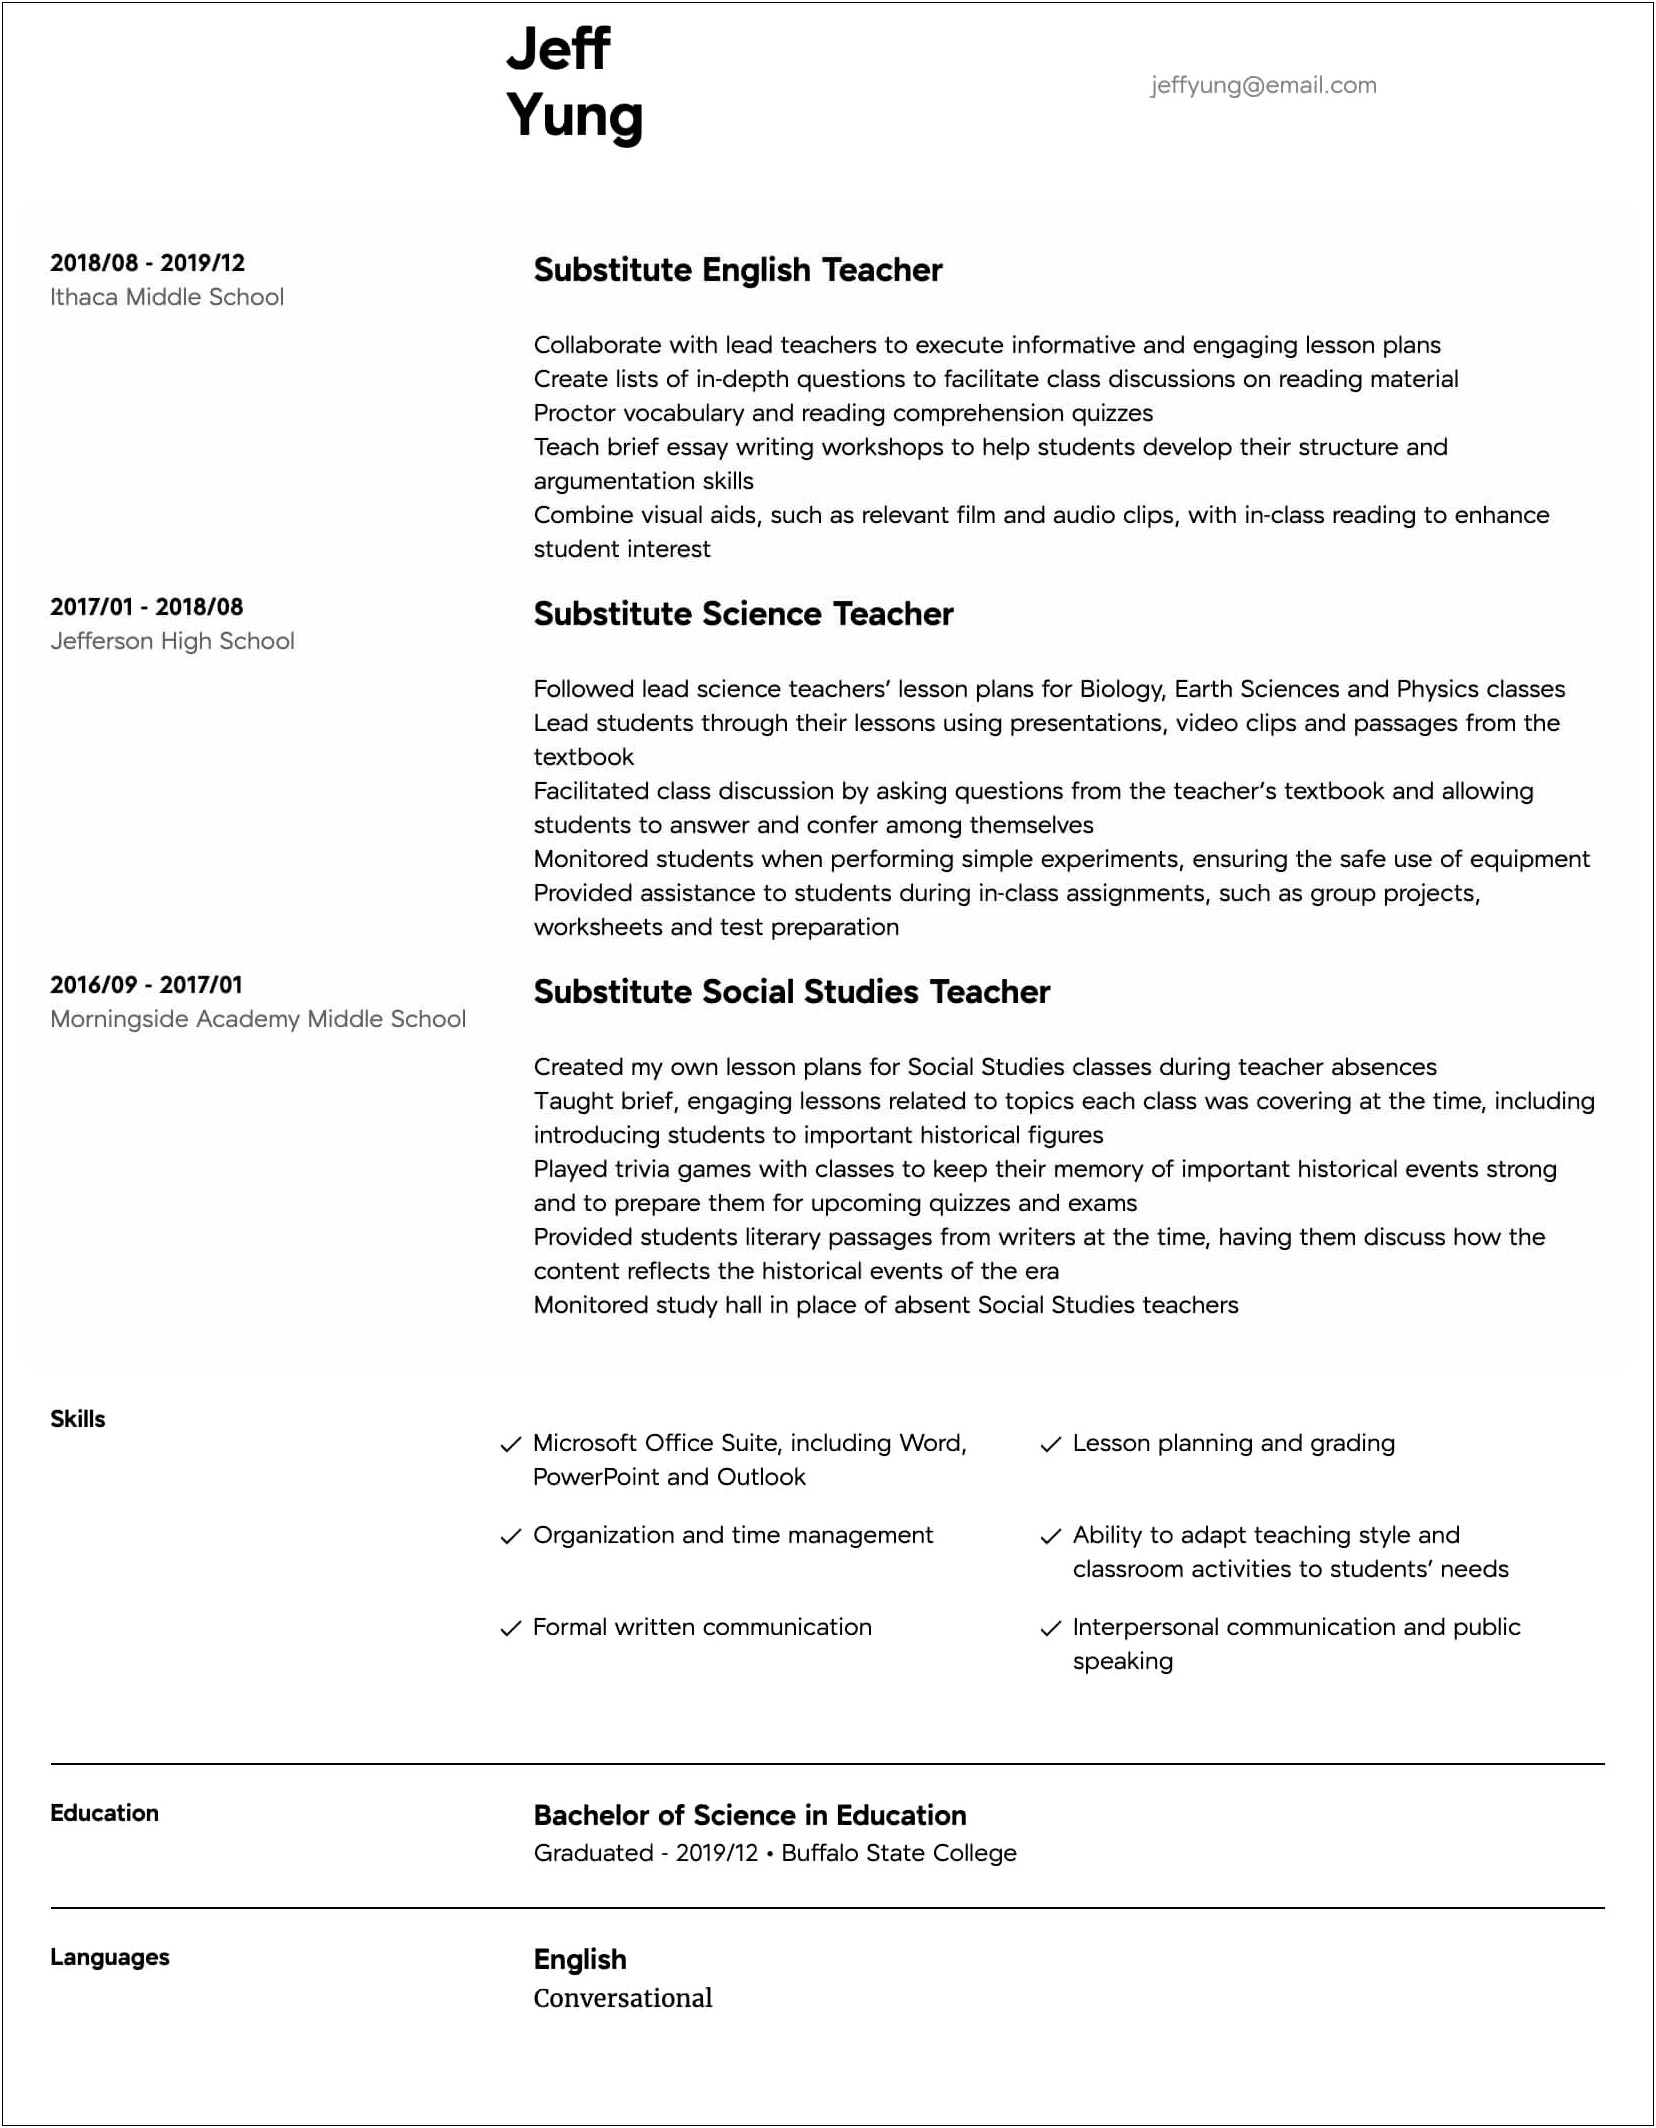 Skills And Abilities Portion Of Resume